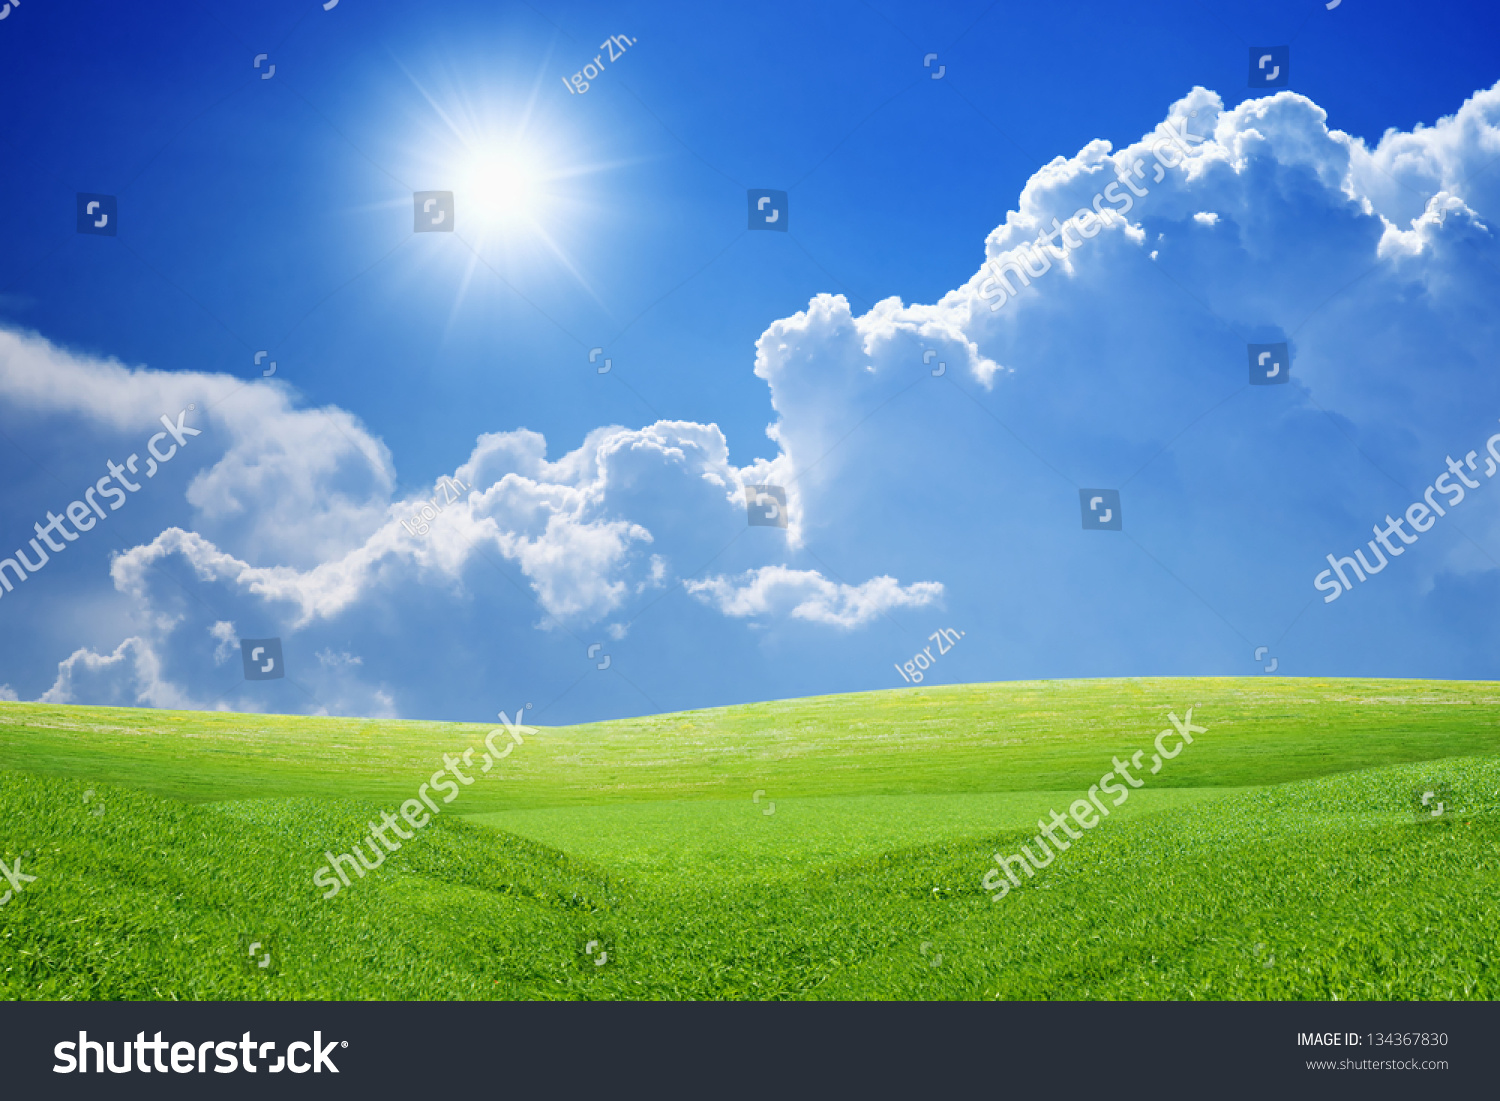 clipart heaven and earth - photo #32